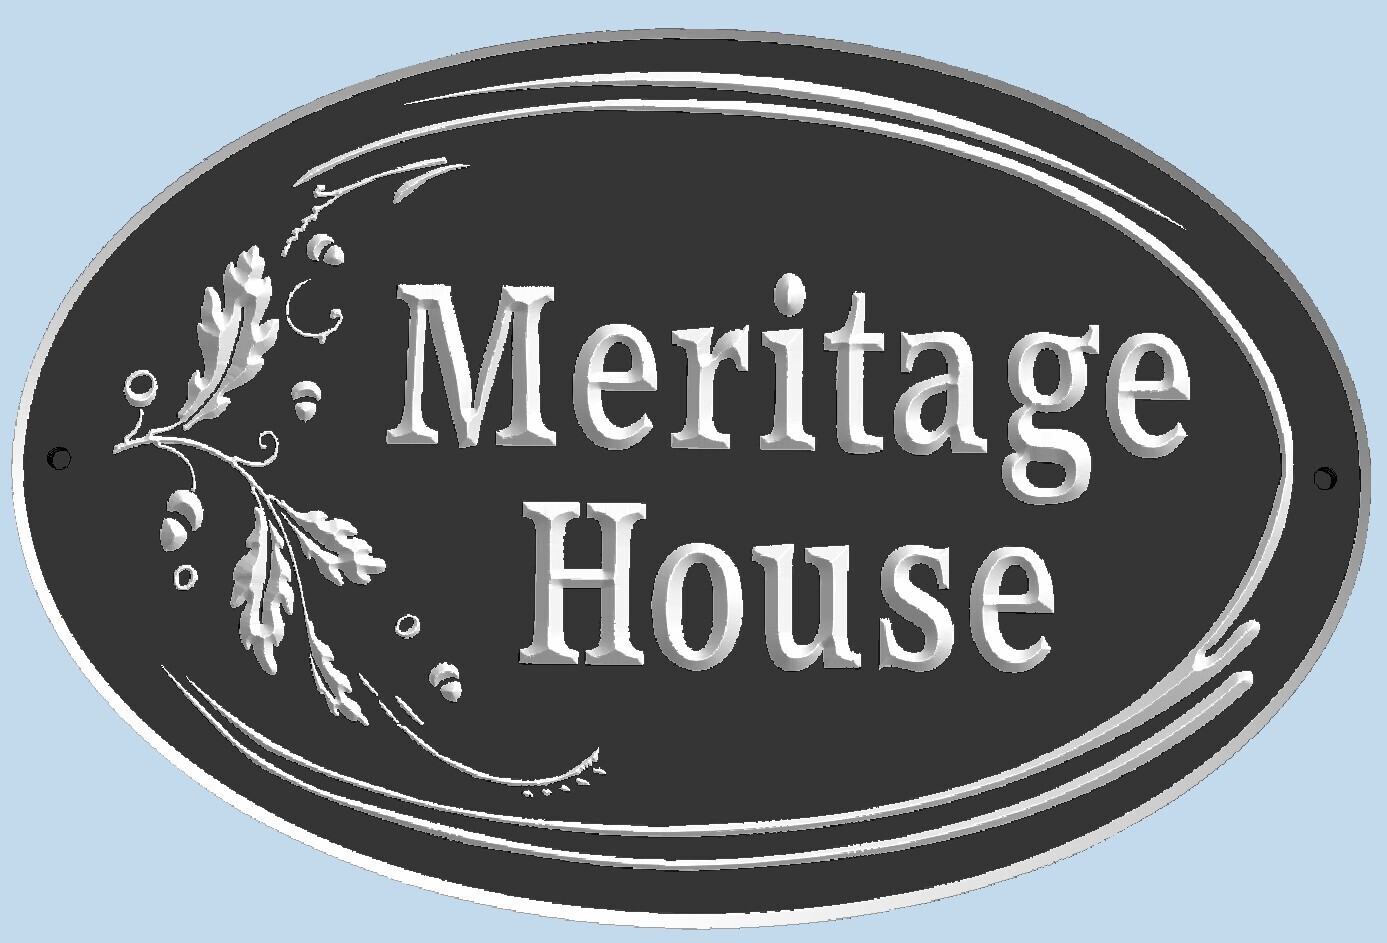 Weather Resistant Custom Exterior Oval Cottage Sign with Carved Oak Leaves and Acorns Painted with White Carving - Solid 3/4 inch thick PVC